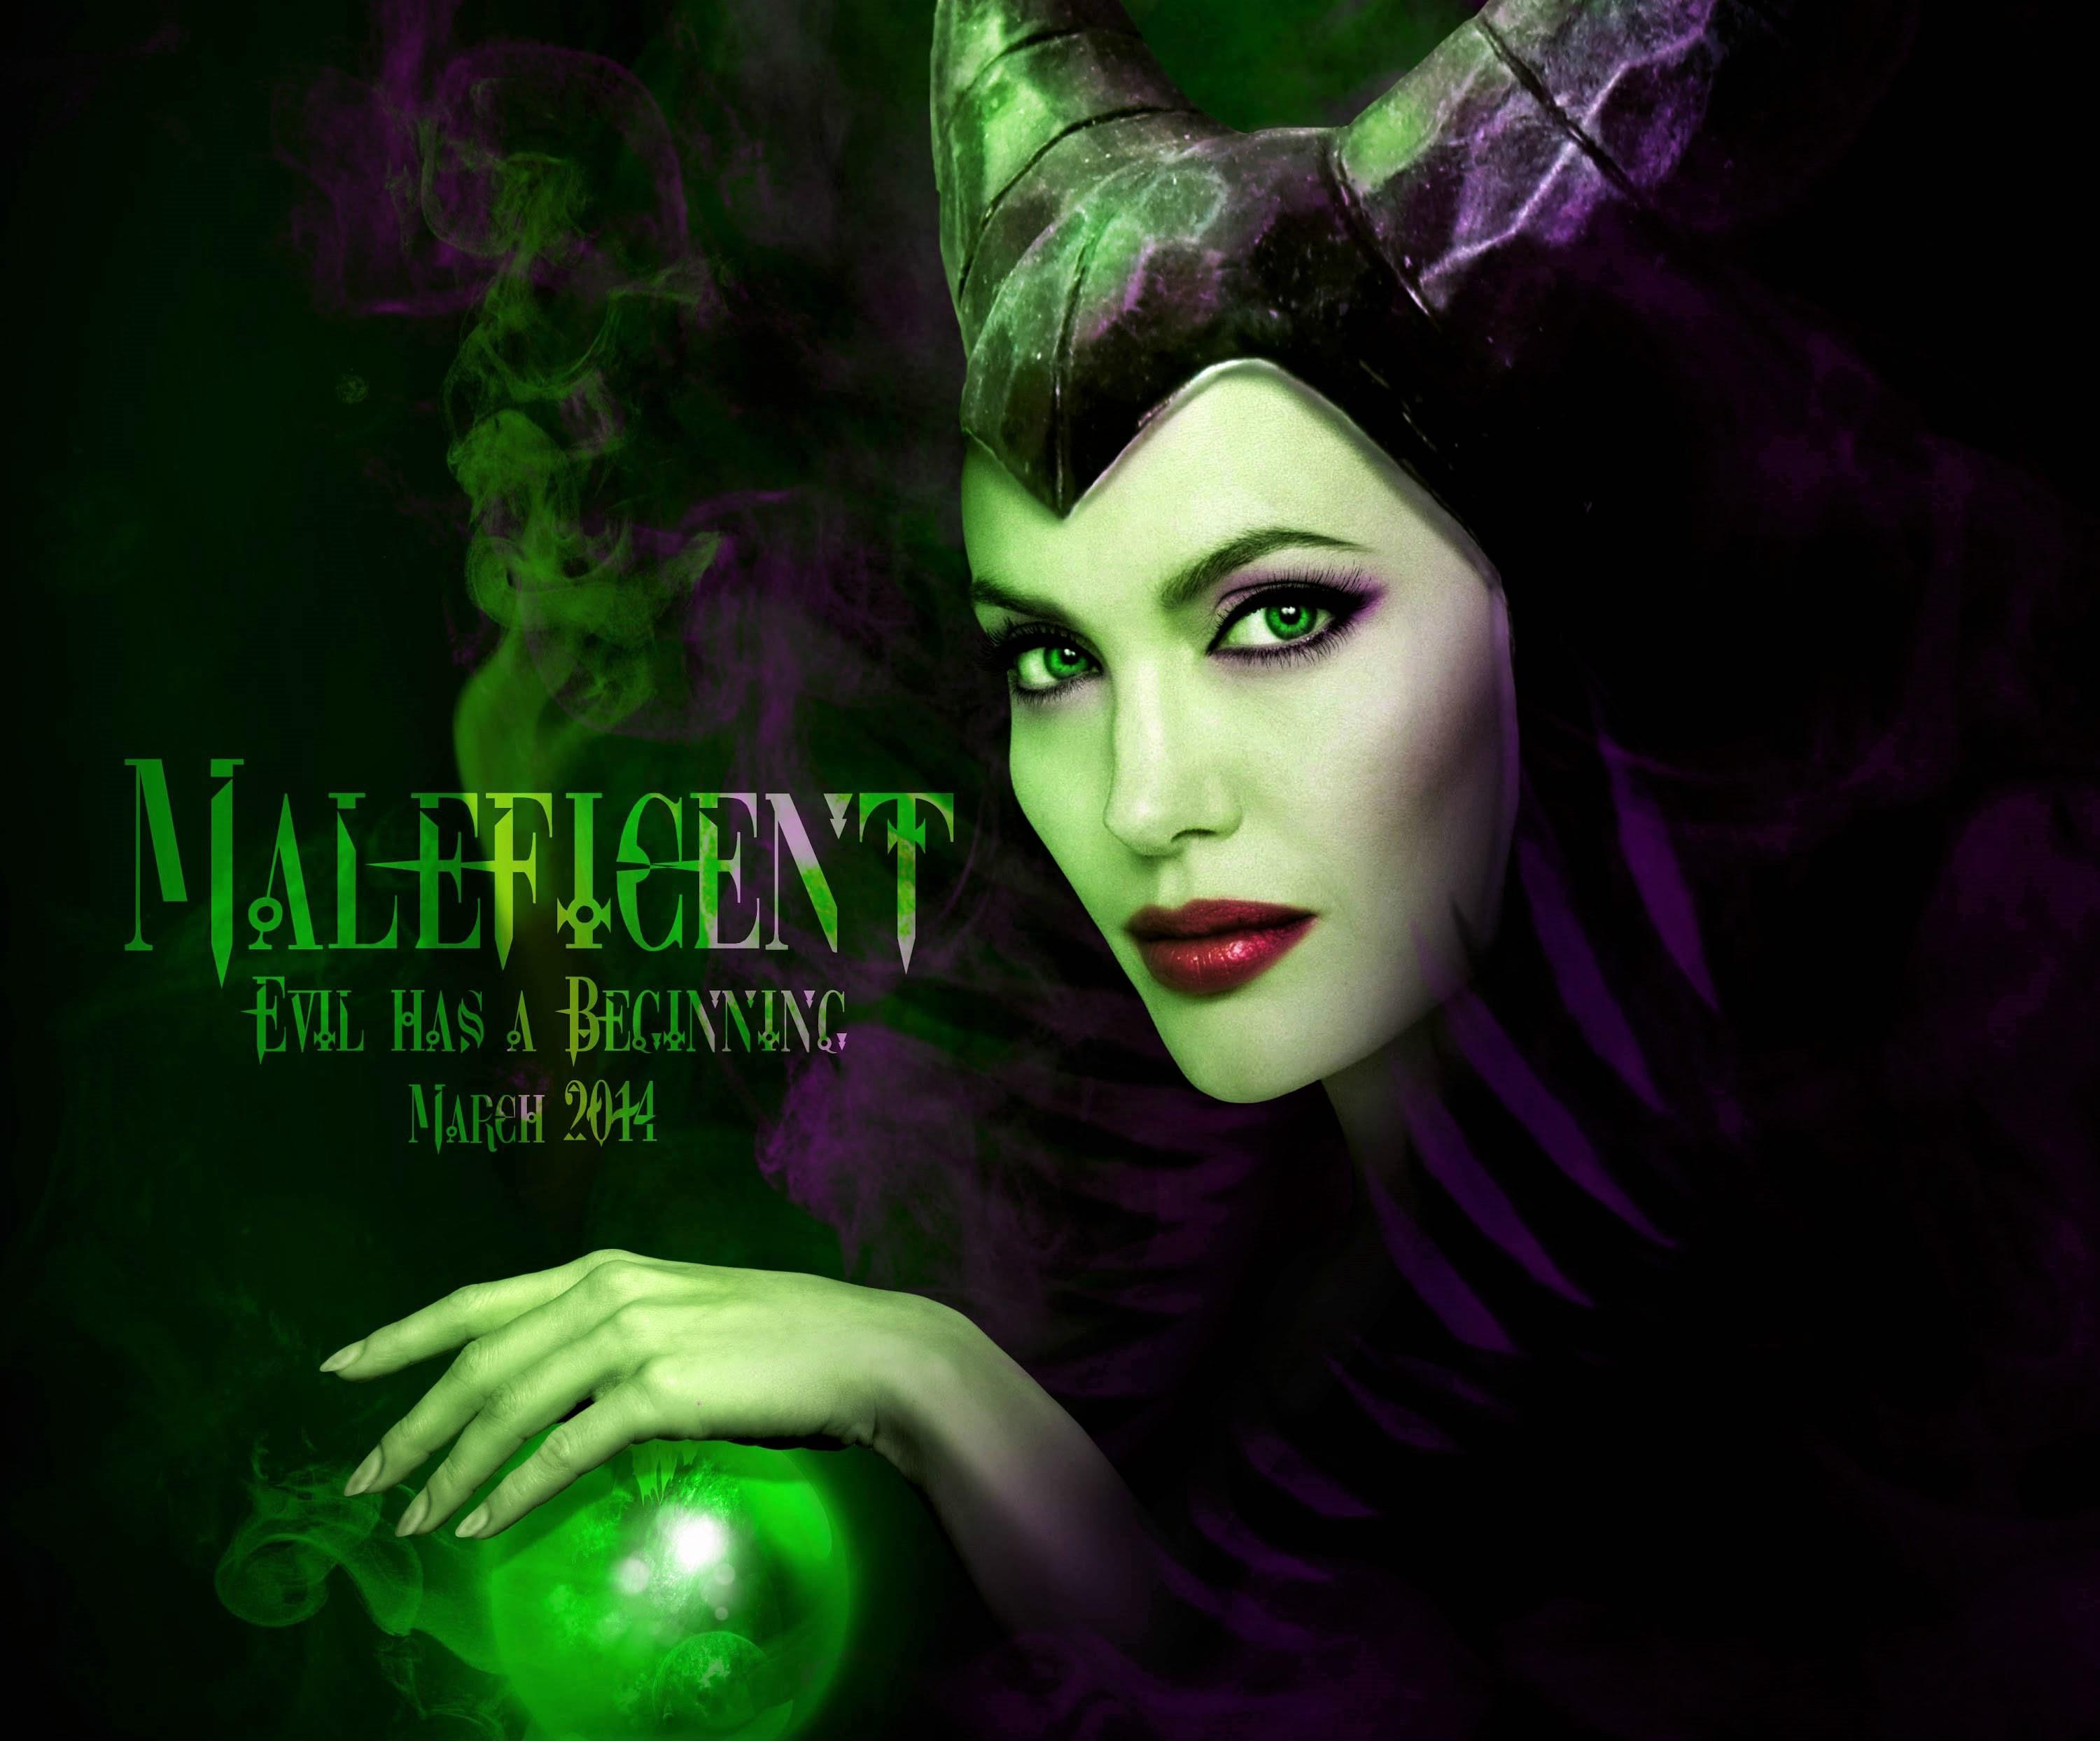 Maleficent Movie Poster HD Wallpaper. Background Image